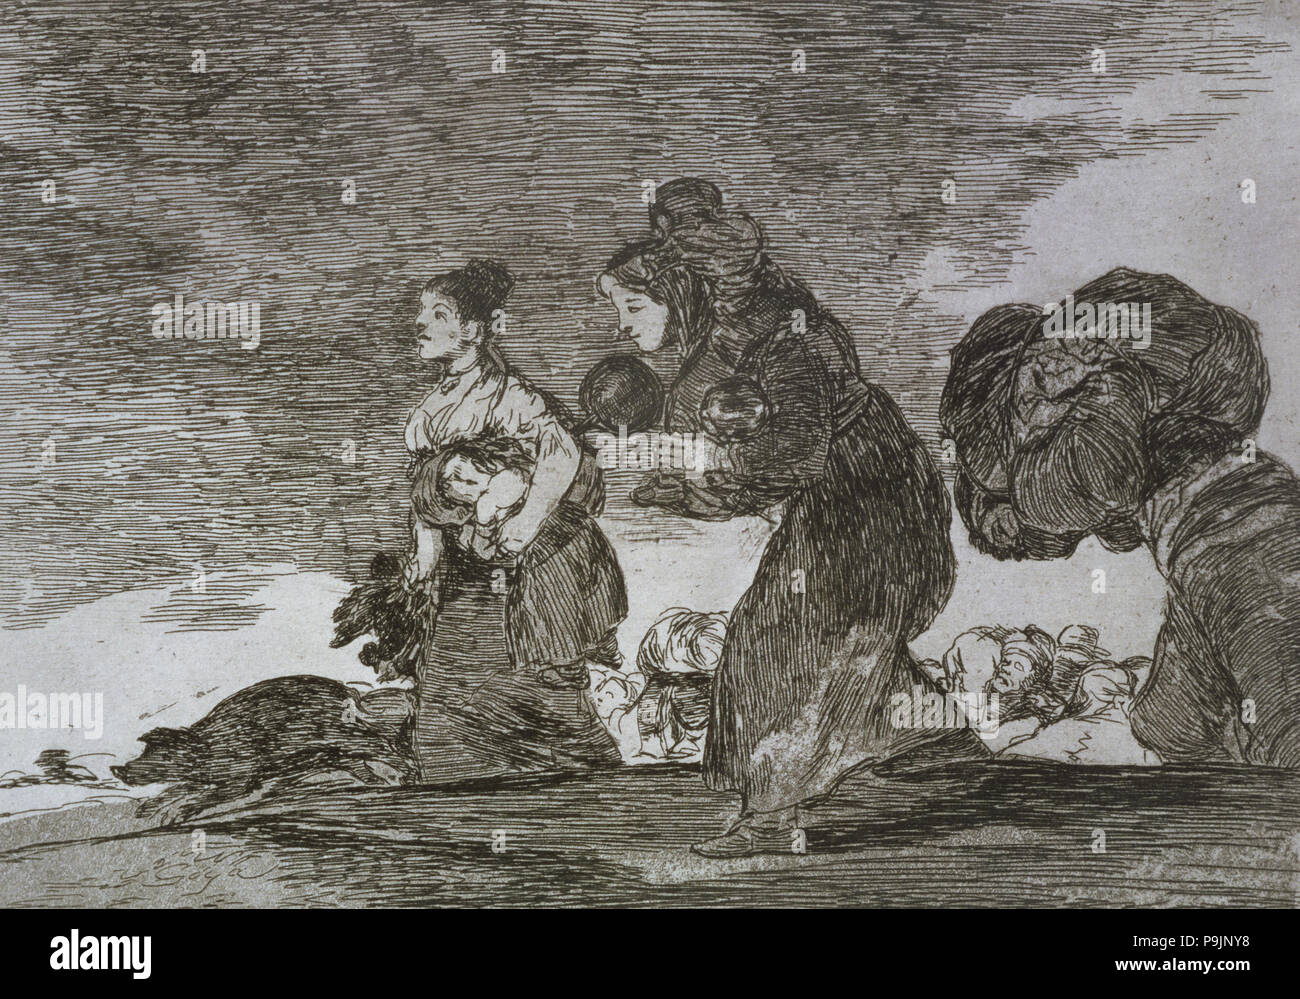 The Disasters of War, a series of etchings by Francisco de Goya (1746-1828), plate 45: 'I esto ta… Stock Photo